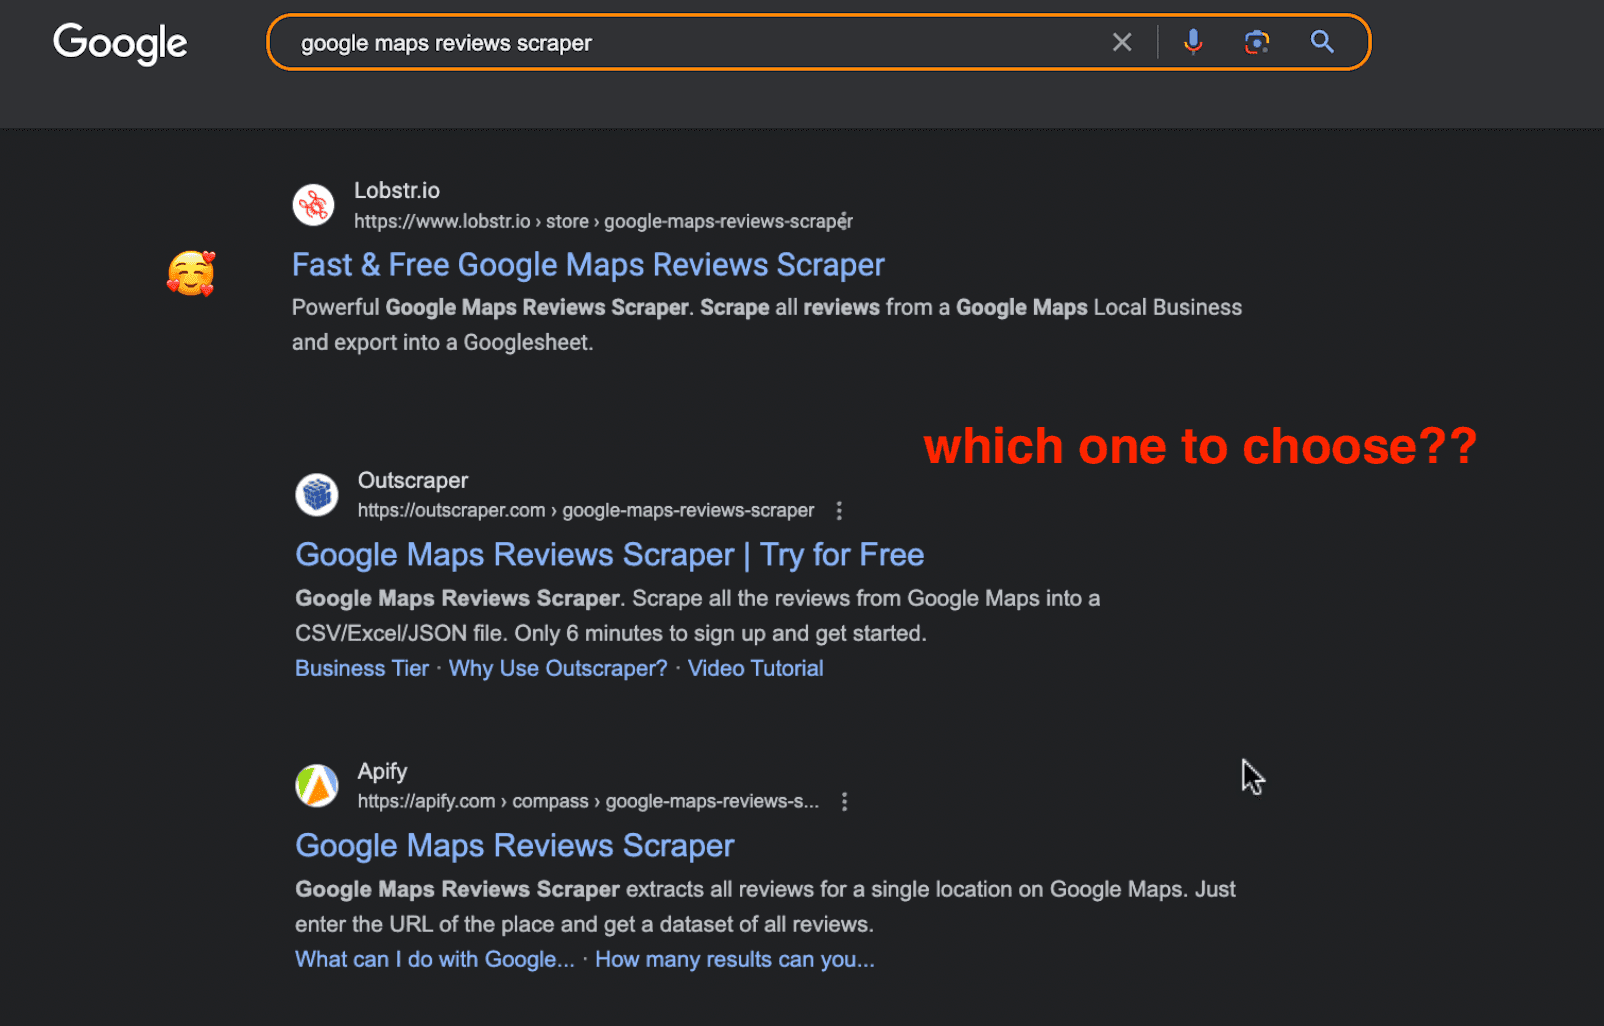 google maps reviews scraper no code which one to choose - image9.png